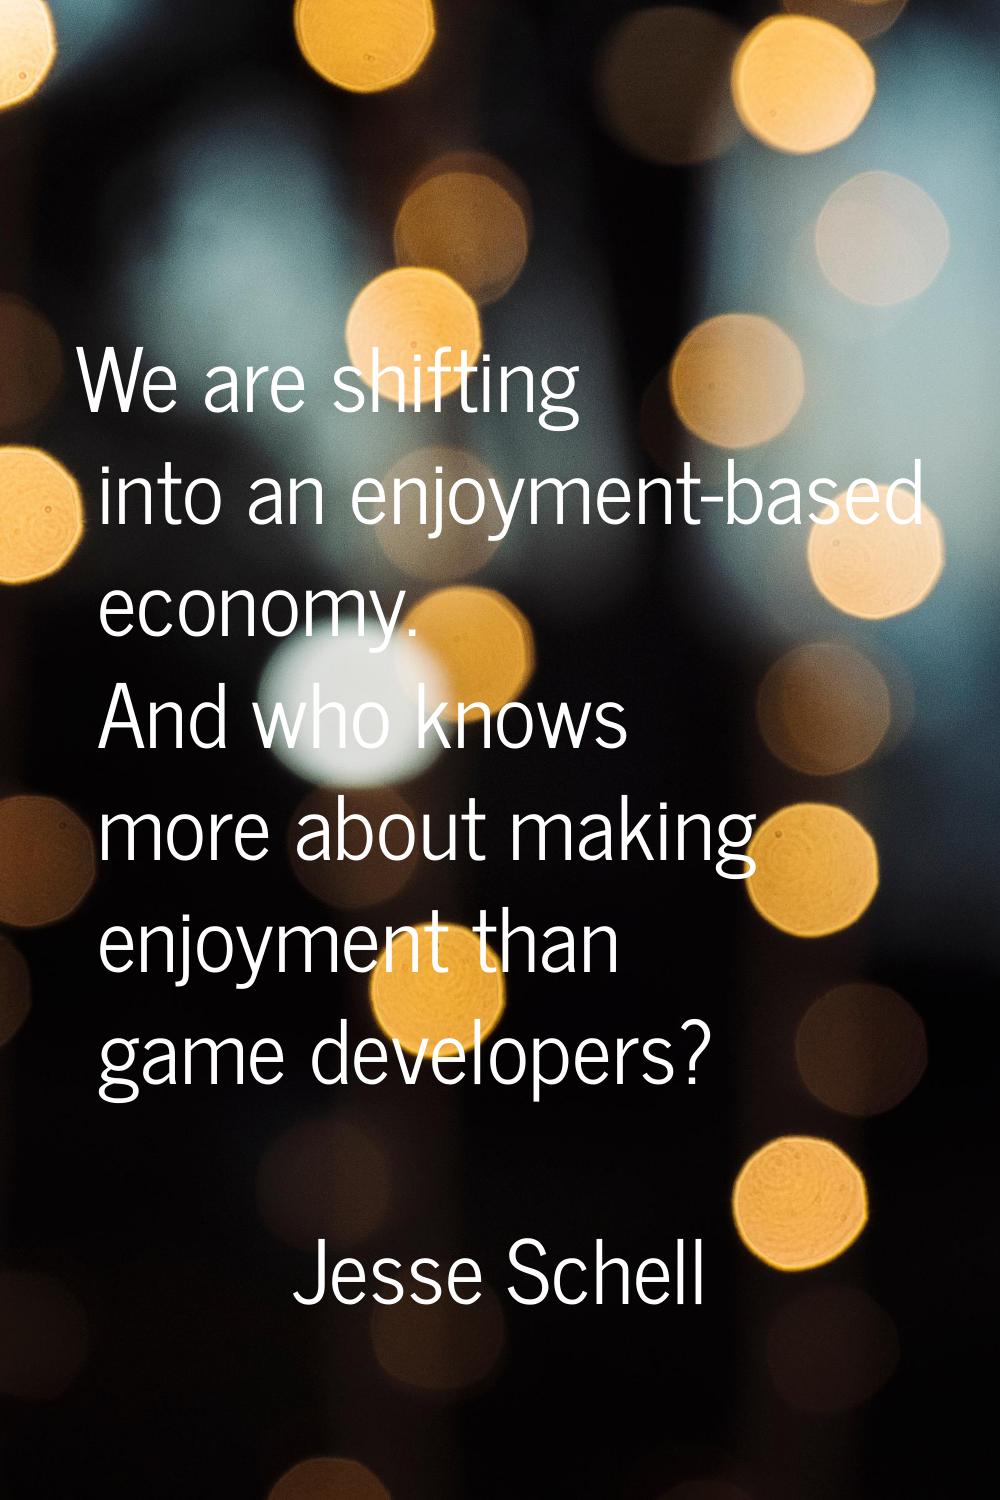 We are shifting into an enjoyment-based economy. And who knows more about making enjoyment than gam